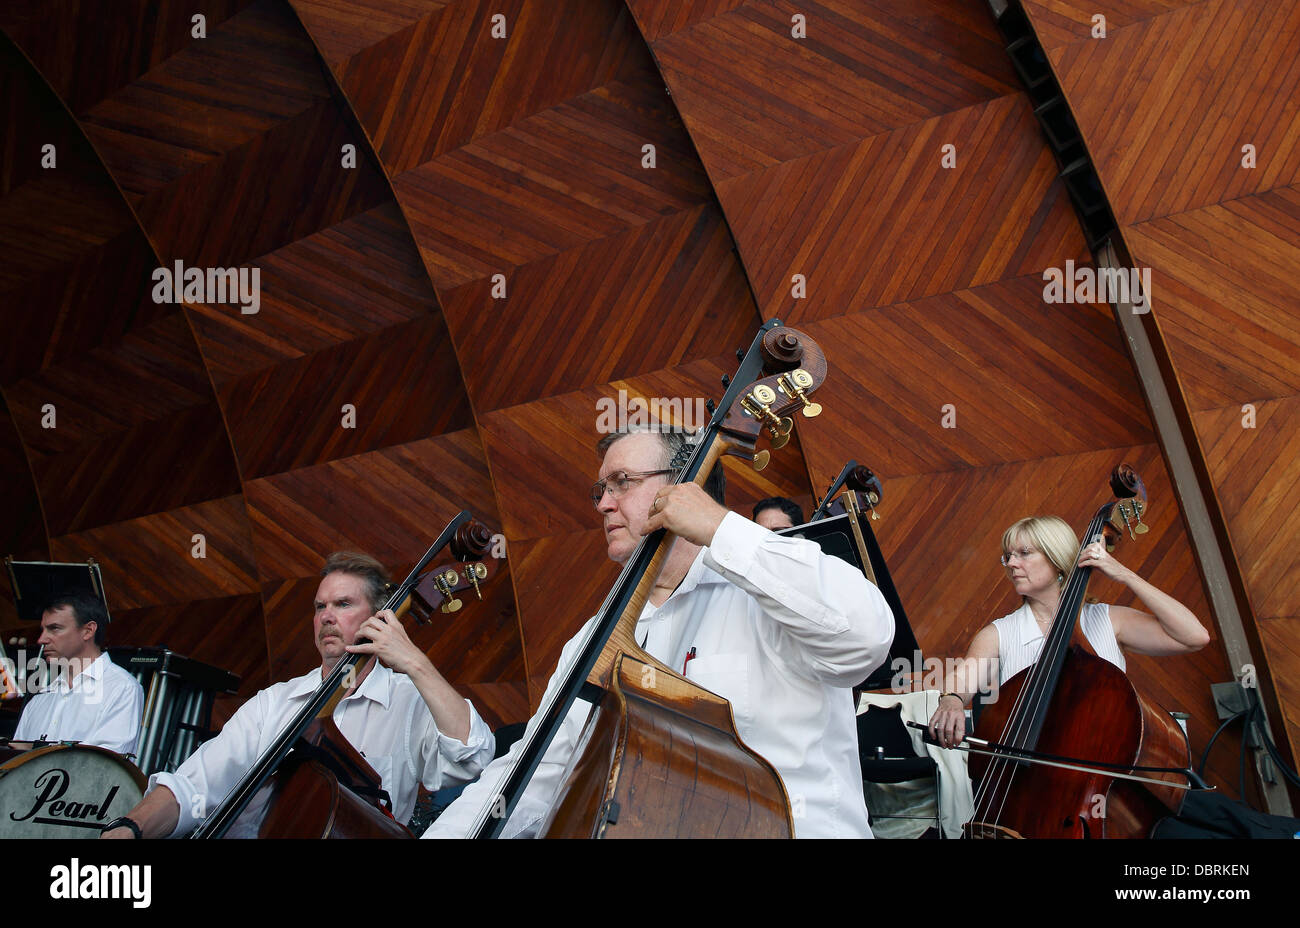 Double bass section, Boston Landmarks Orchestra at the Hatch Shell in Boston, Massachusetts Stock Photo